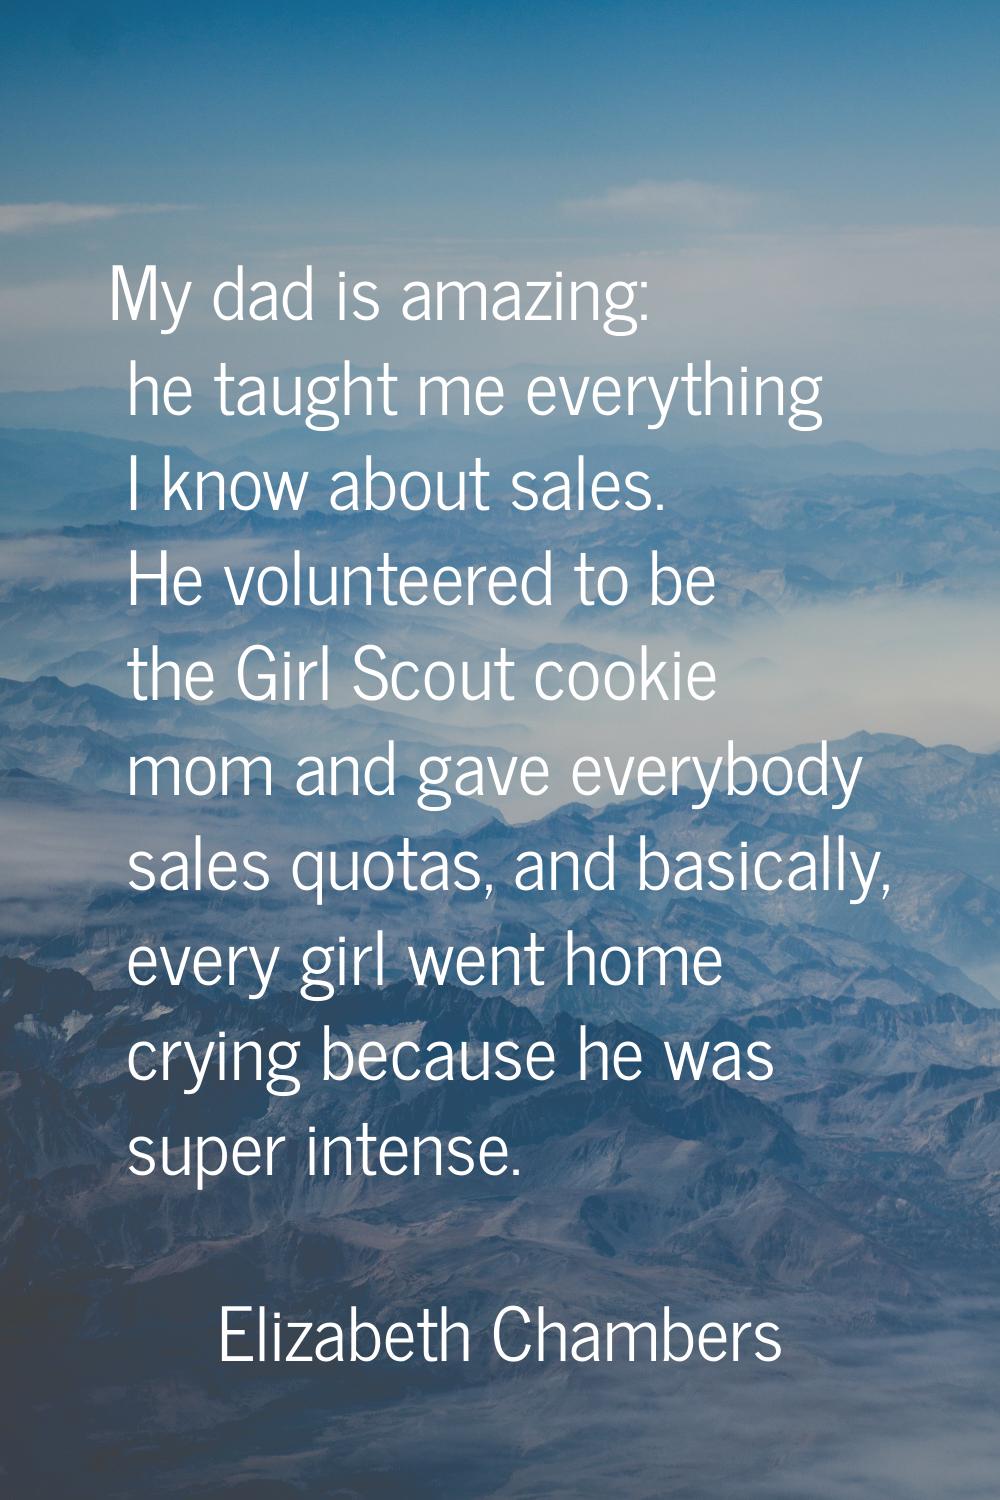 My dad is amazing: he taught me everything I know about sales. He volunteered to be the Girl Scout 